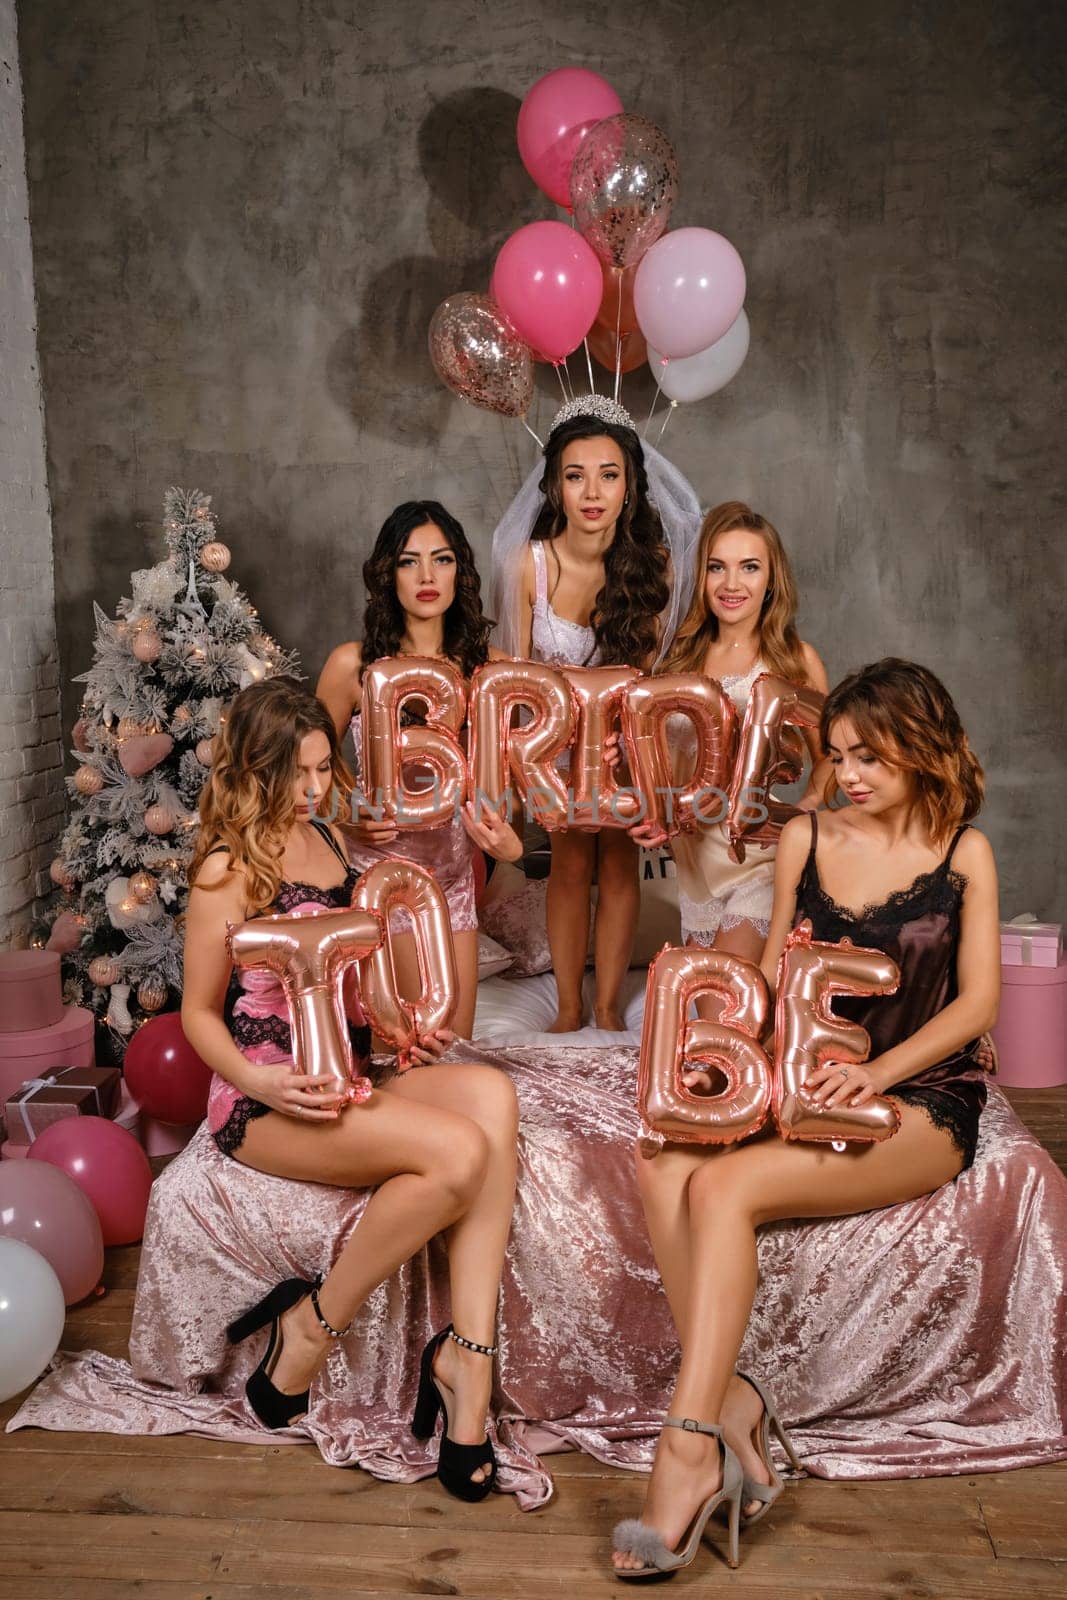 Cute females in sexy lingerie, bride in veil, enjoying bachelorette party, sitting on bed, smiling, holding balloons in form of letters, built sentence bride to be. Christmas decorations. Close-up.